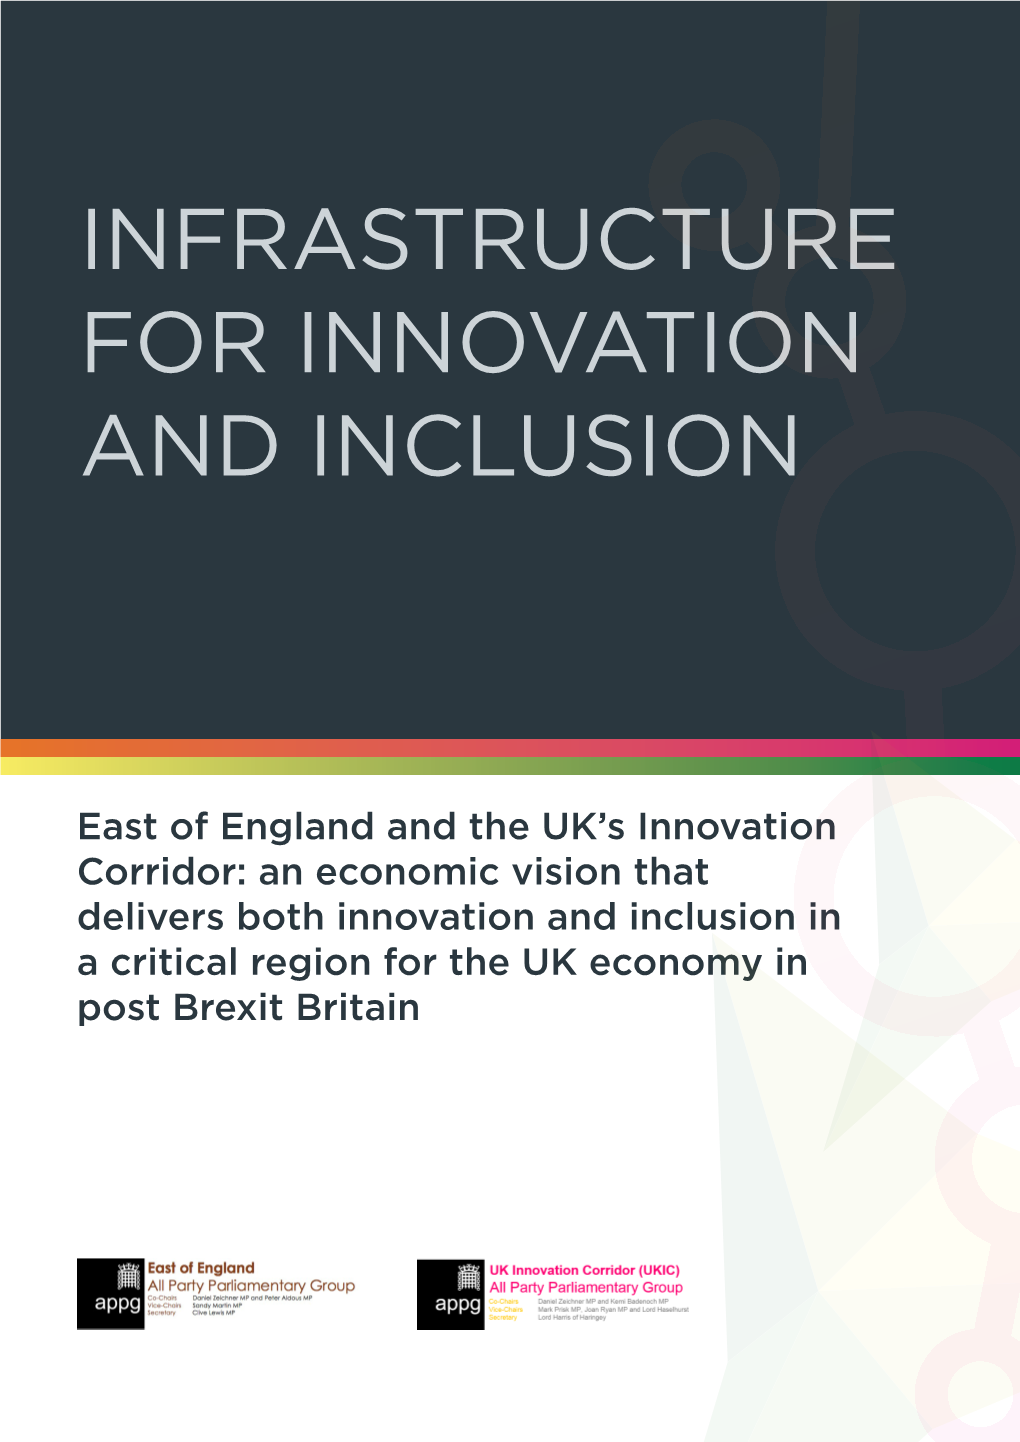 Infrastructure for Innovation and Inclusion